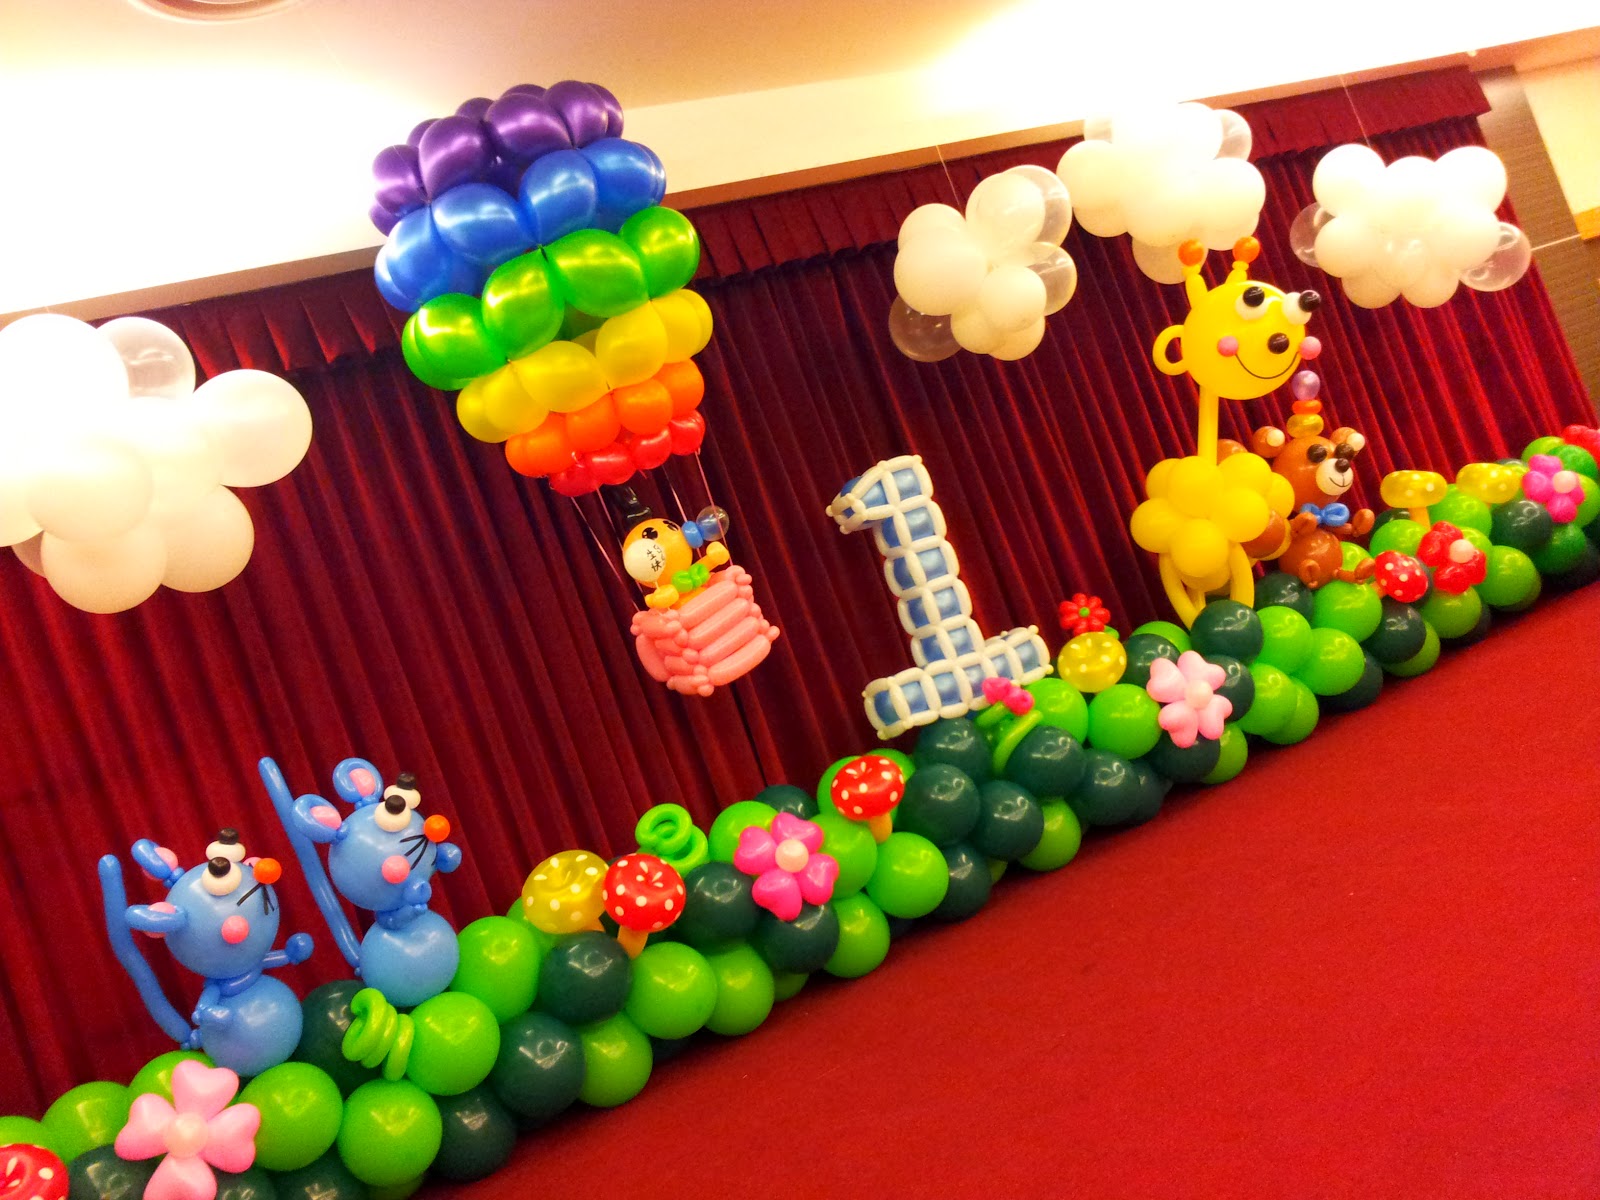 Balloon decorations for weddings, birthday parties